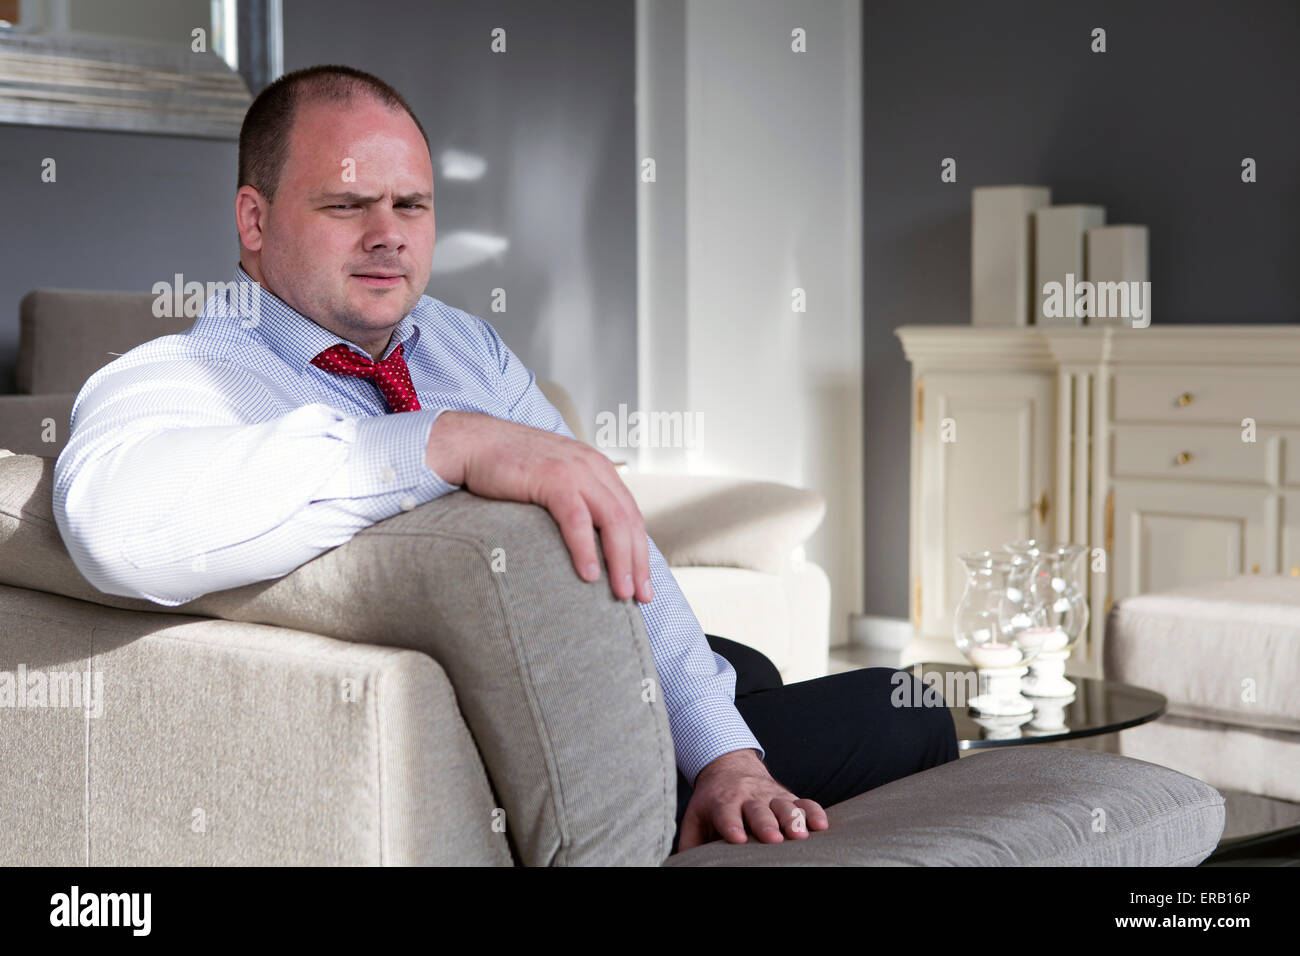 man in shirt and tie sits on couch and looks serious Stock Photo